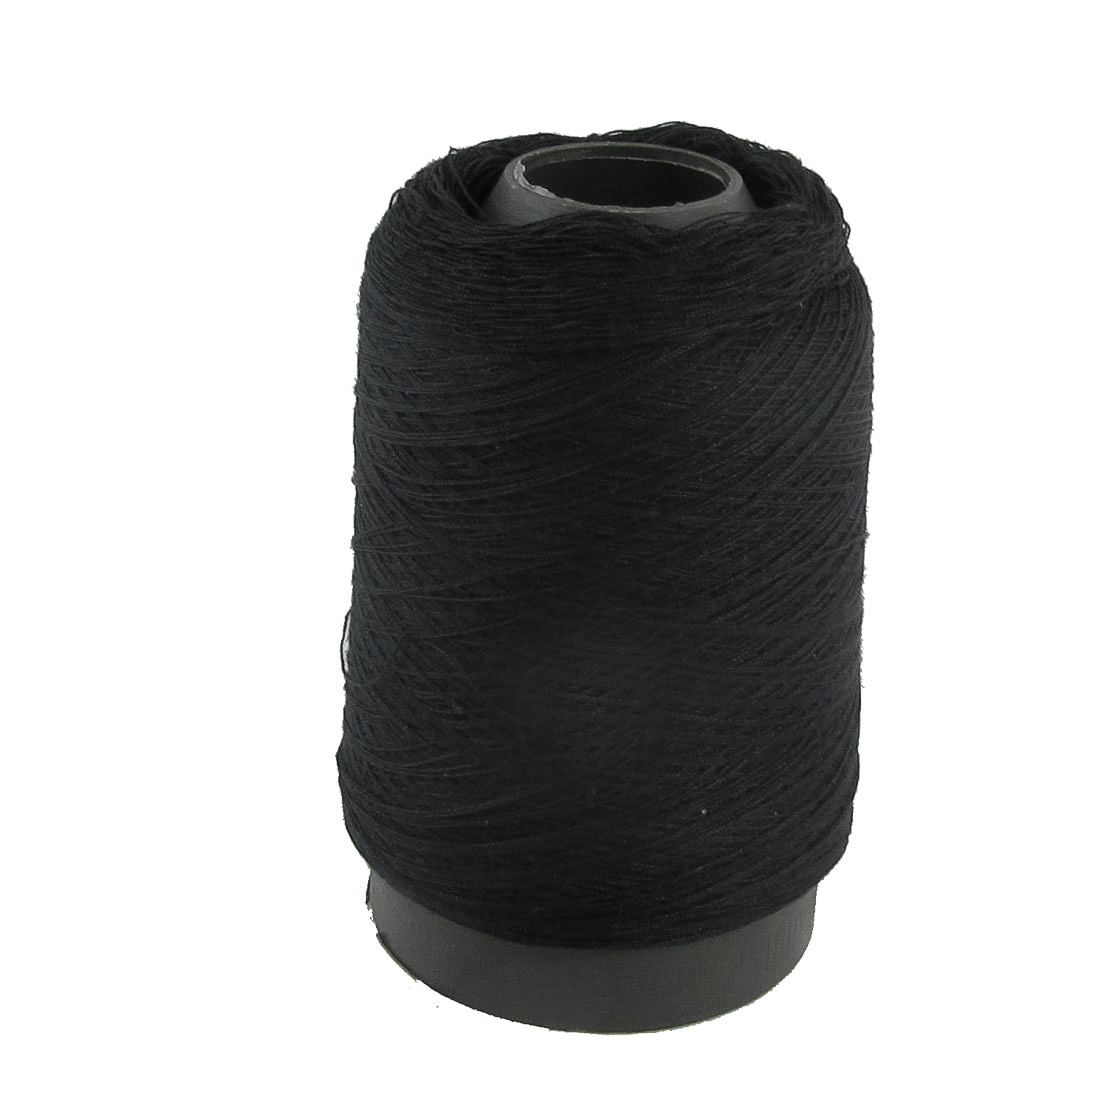 Unique Bargains Black Home Cotton Darning Stitching Sewing Thread Reel